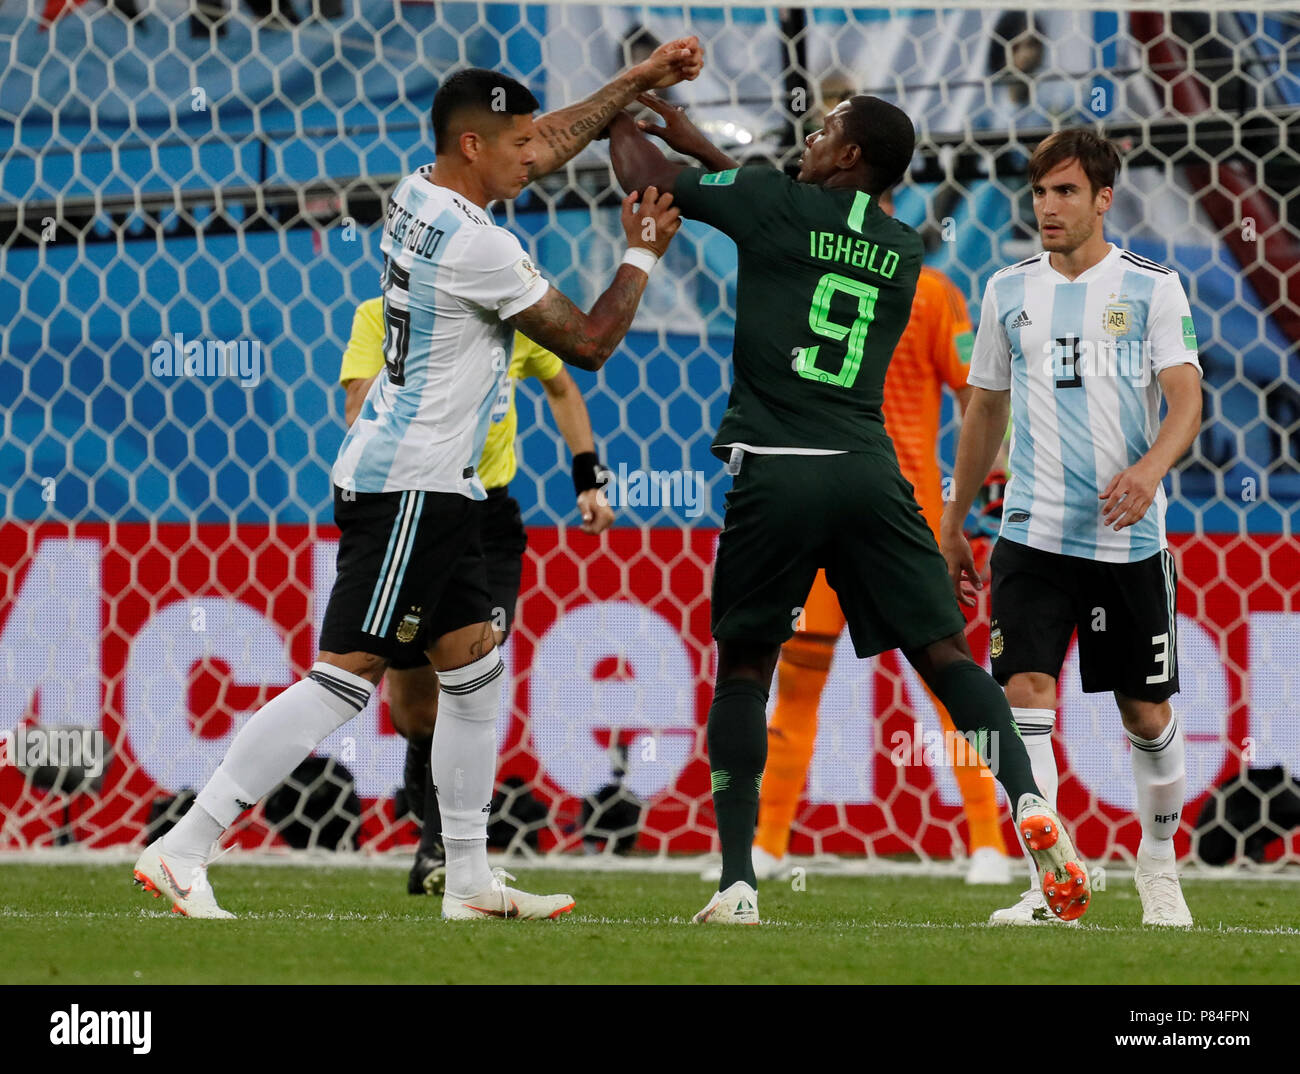 SAINT PETERSBURG, RUSSIA - JUNE 26: Odion Ighalo (N9) of Nigeria national team and Marcos Rojo of Argentina national team during the 2018 FIFA World Cup Russia group D match between Nigeria and Argentina at Saint Petersburg Stadium on June 26, 2018 in Saint Petersburg, Russia. (MB Media) Stock Photo